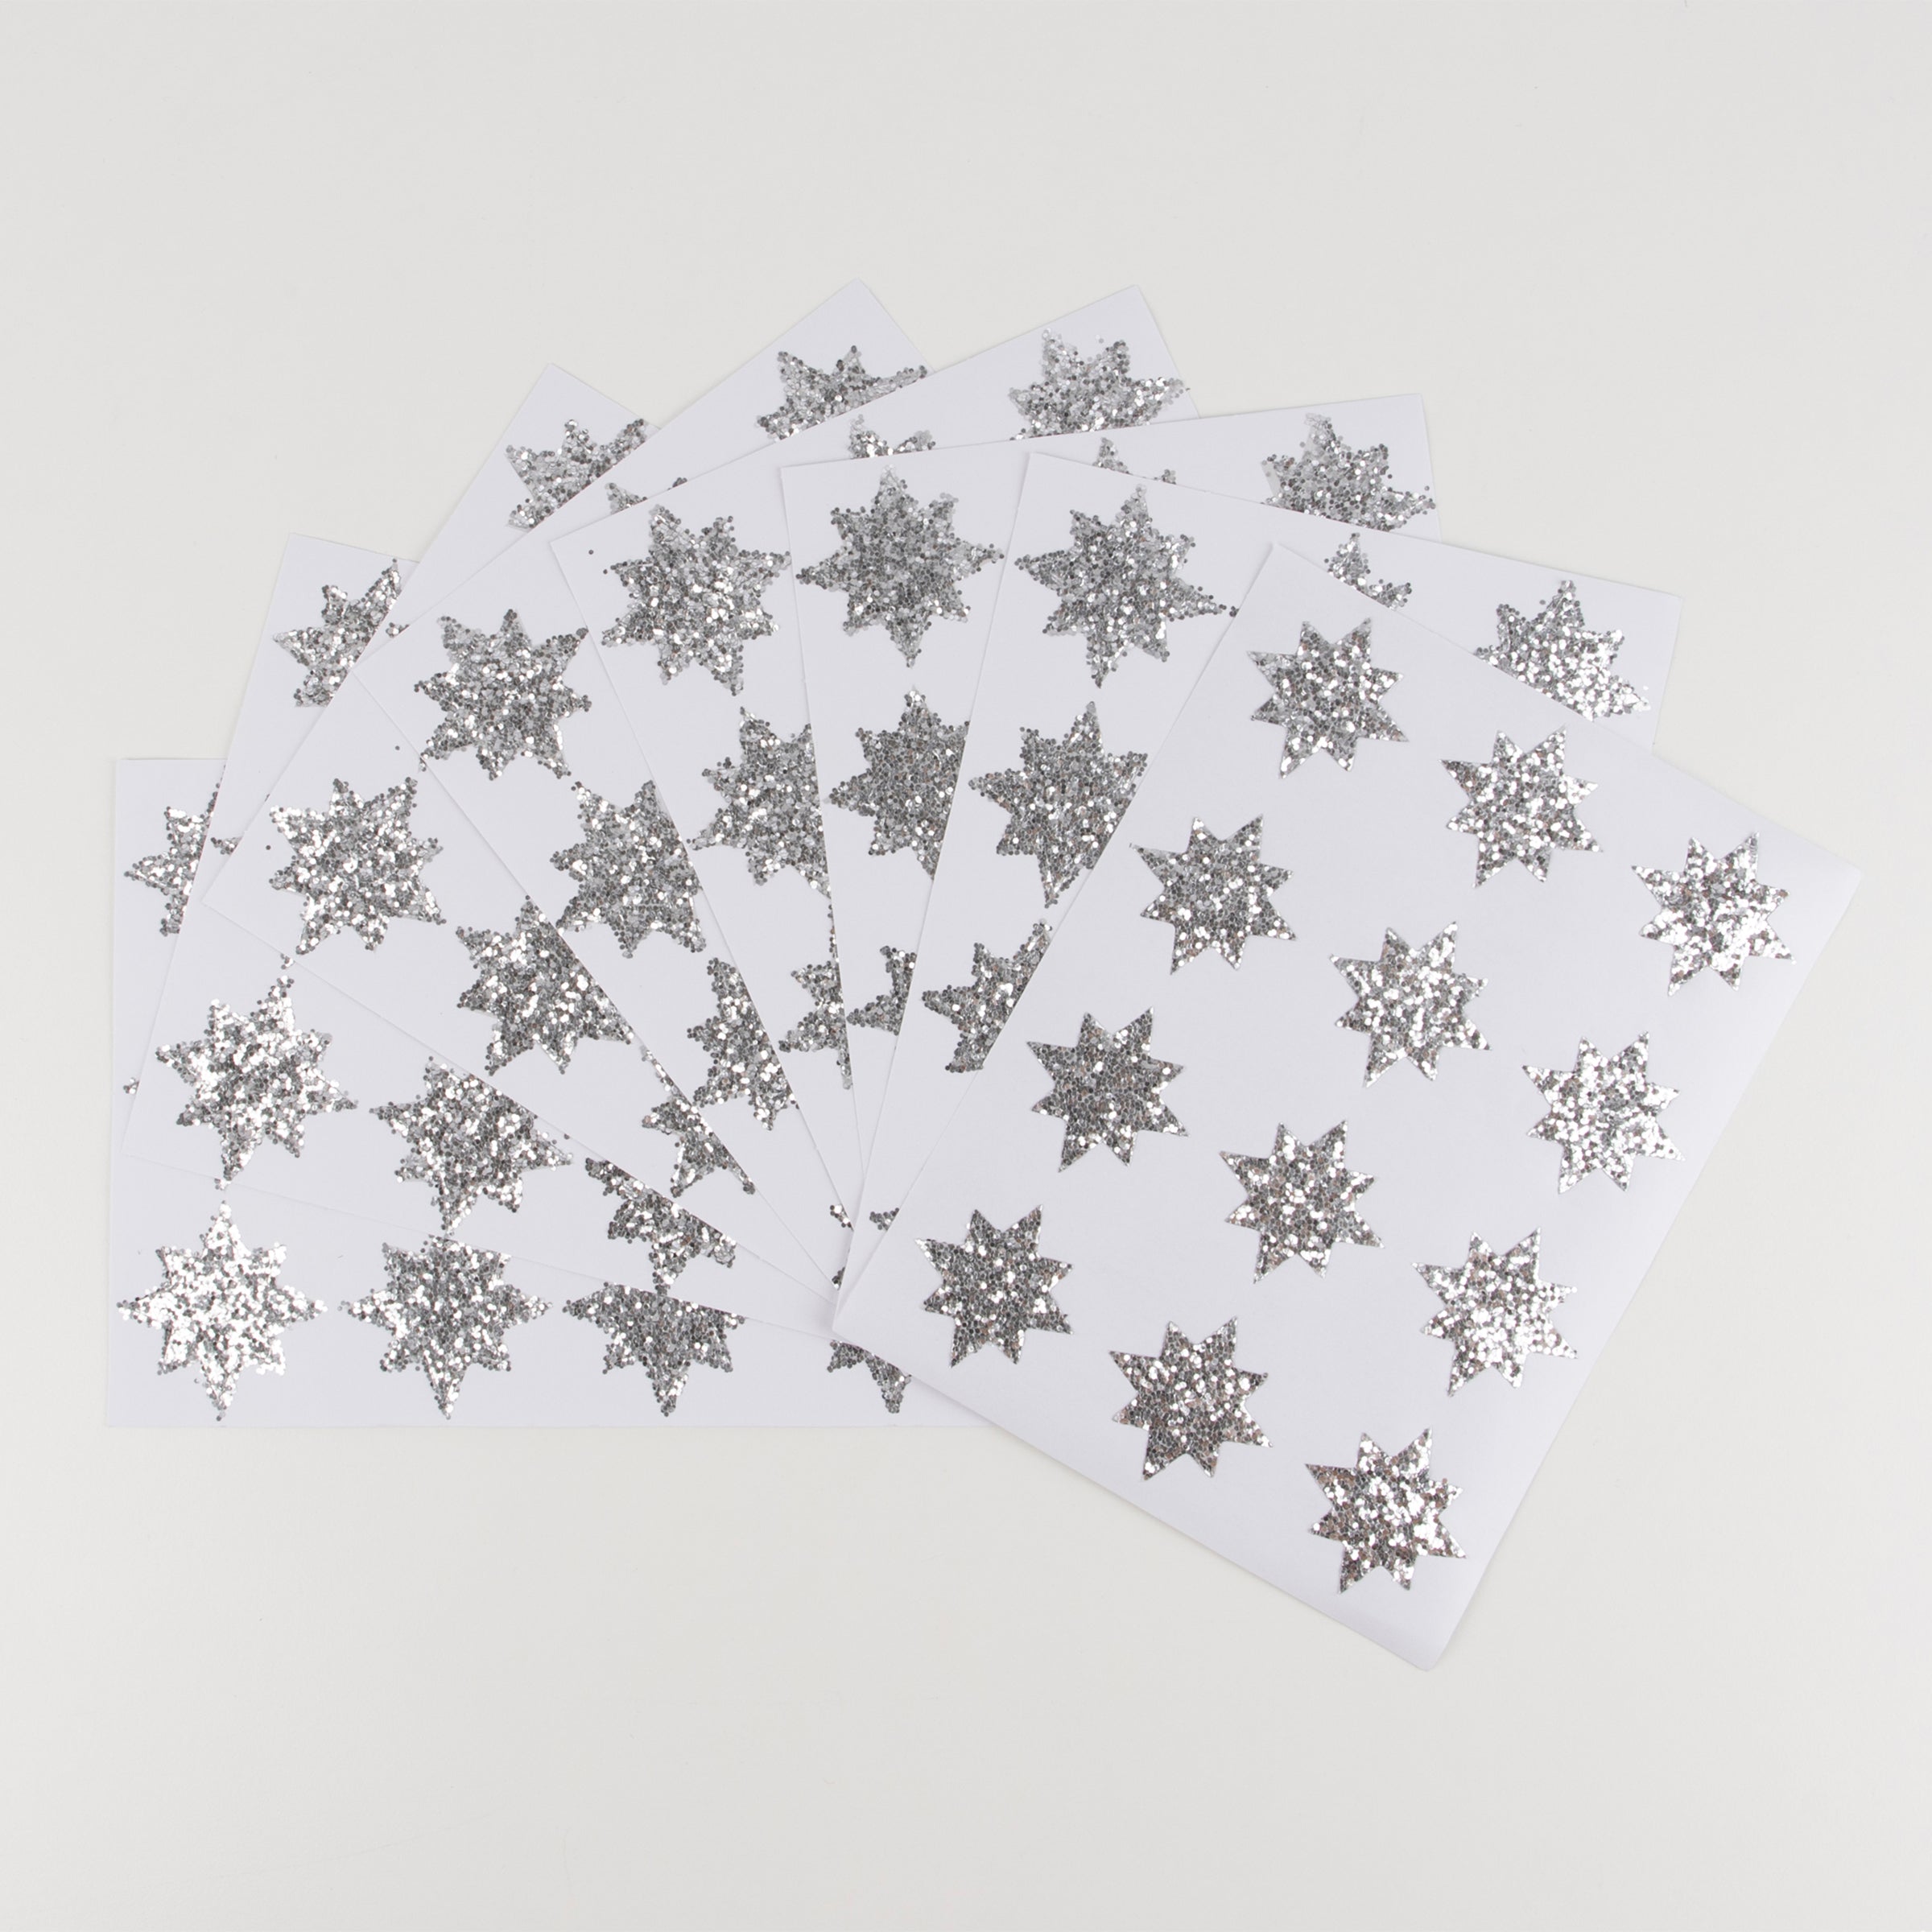 Glitter Stickers Stars 1 inch - Two Color Way - Silver Green